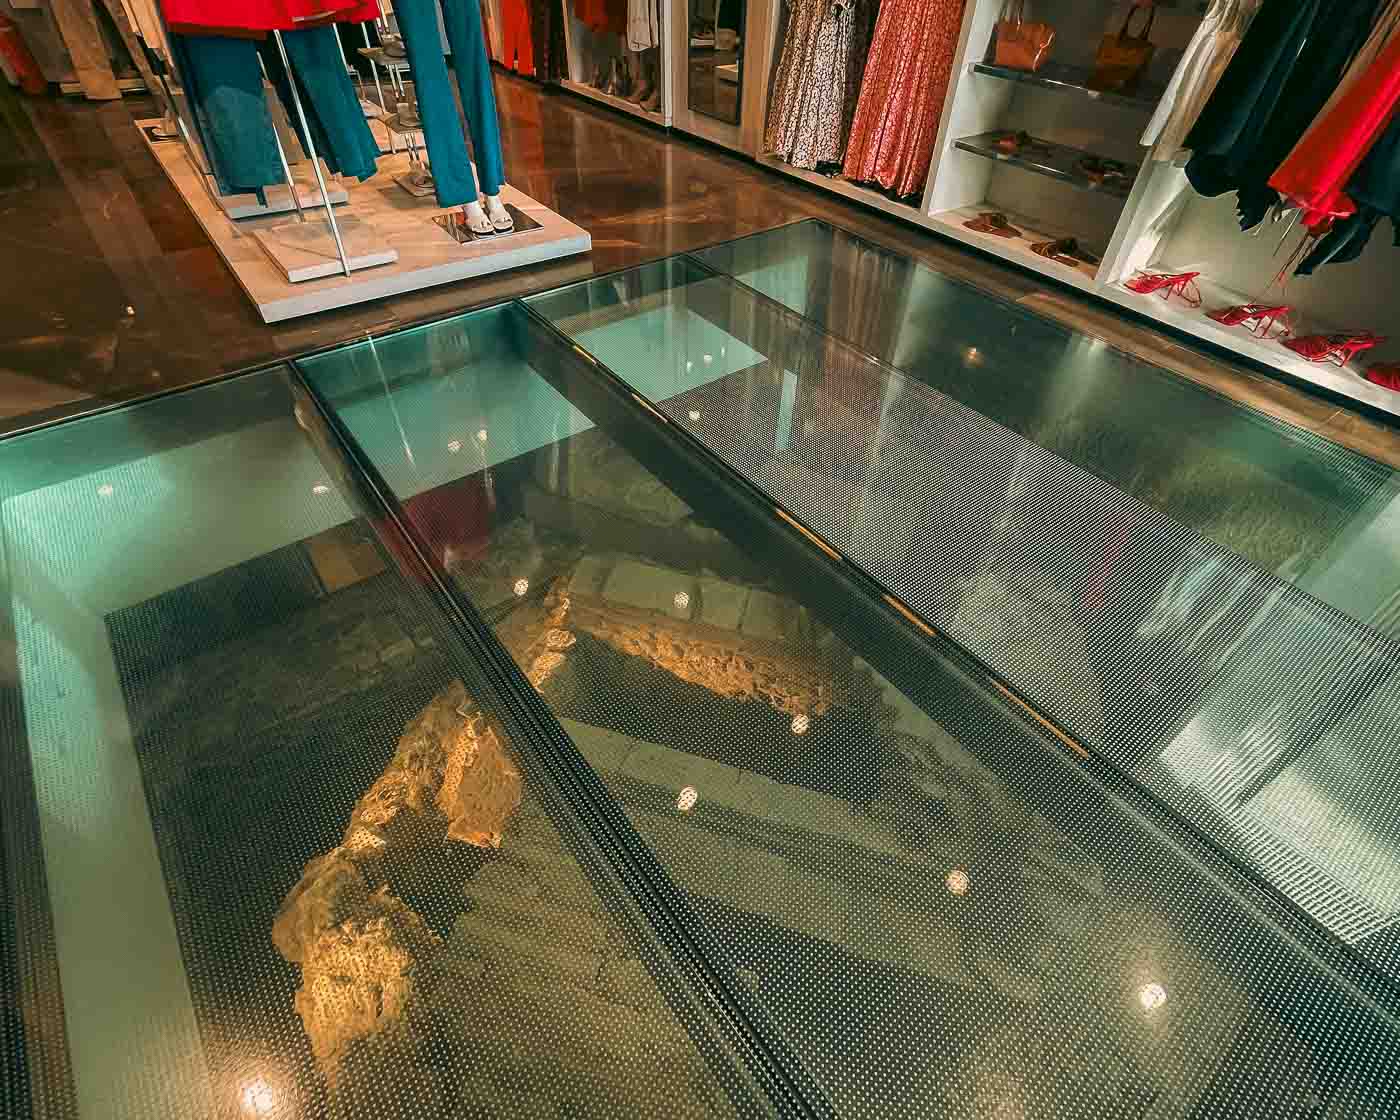 This unique Zara location offers more than just the latest fashions. In its basement lies a well-preserved Roman tomb discovered during the construction of the Athens Metro. It's such an unusual sight that I keep bringing it to people, as I do with McDonald's in Rome.